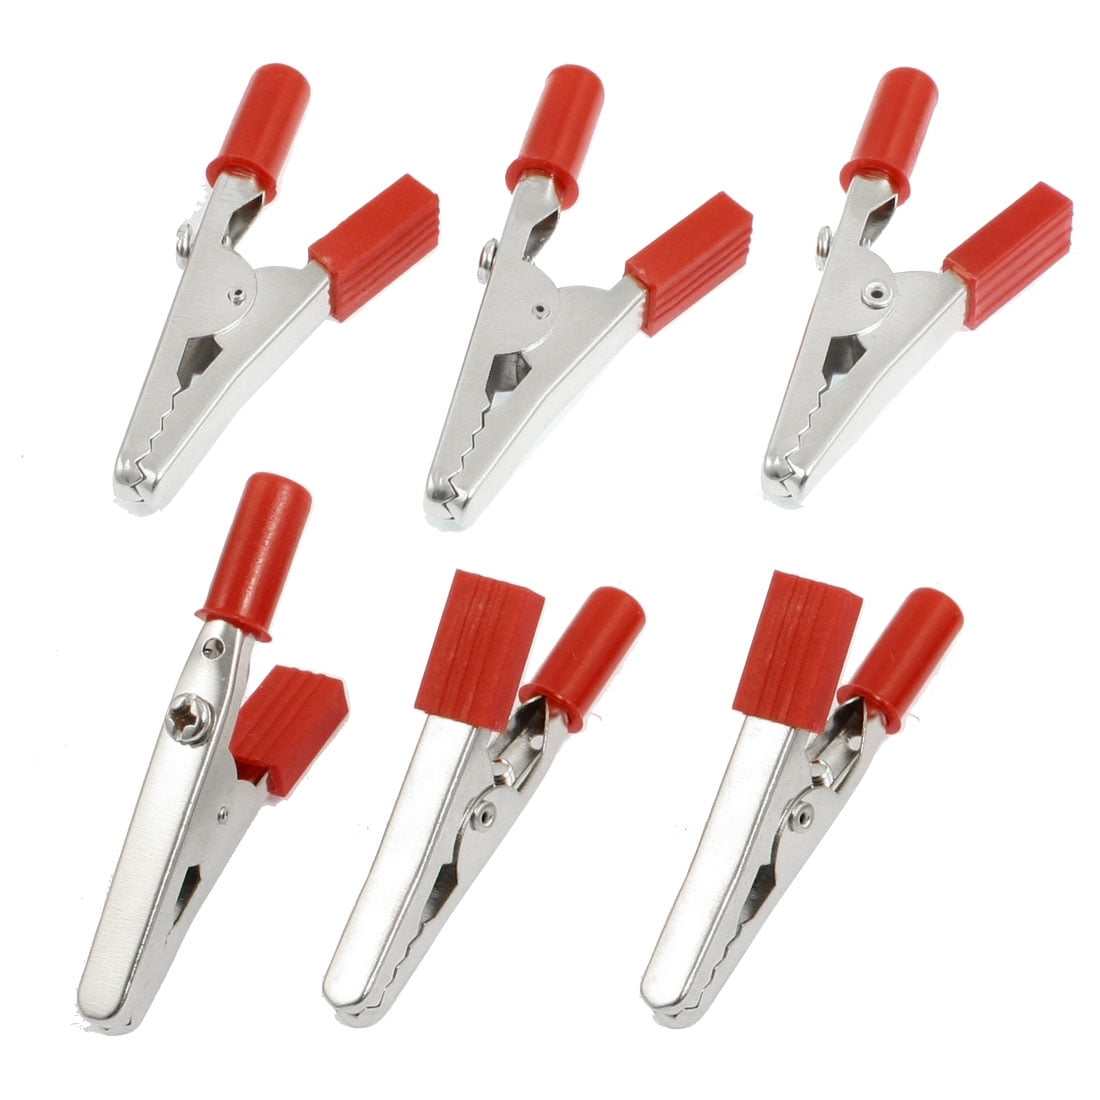 6pcs Alligator Clips Insulated Crocodile Clamps Red Black Test Probe Lead Set 